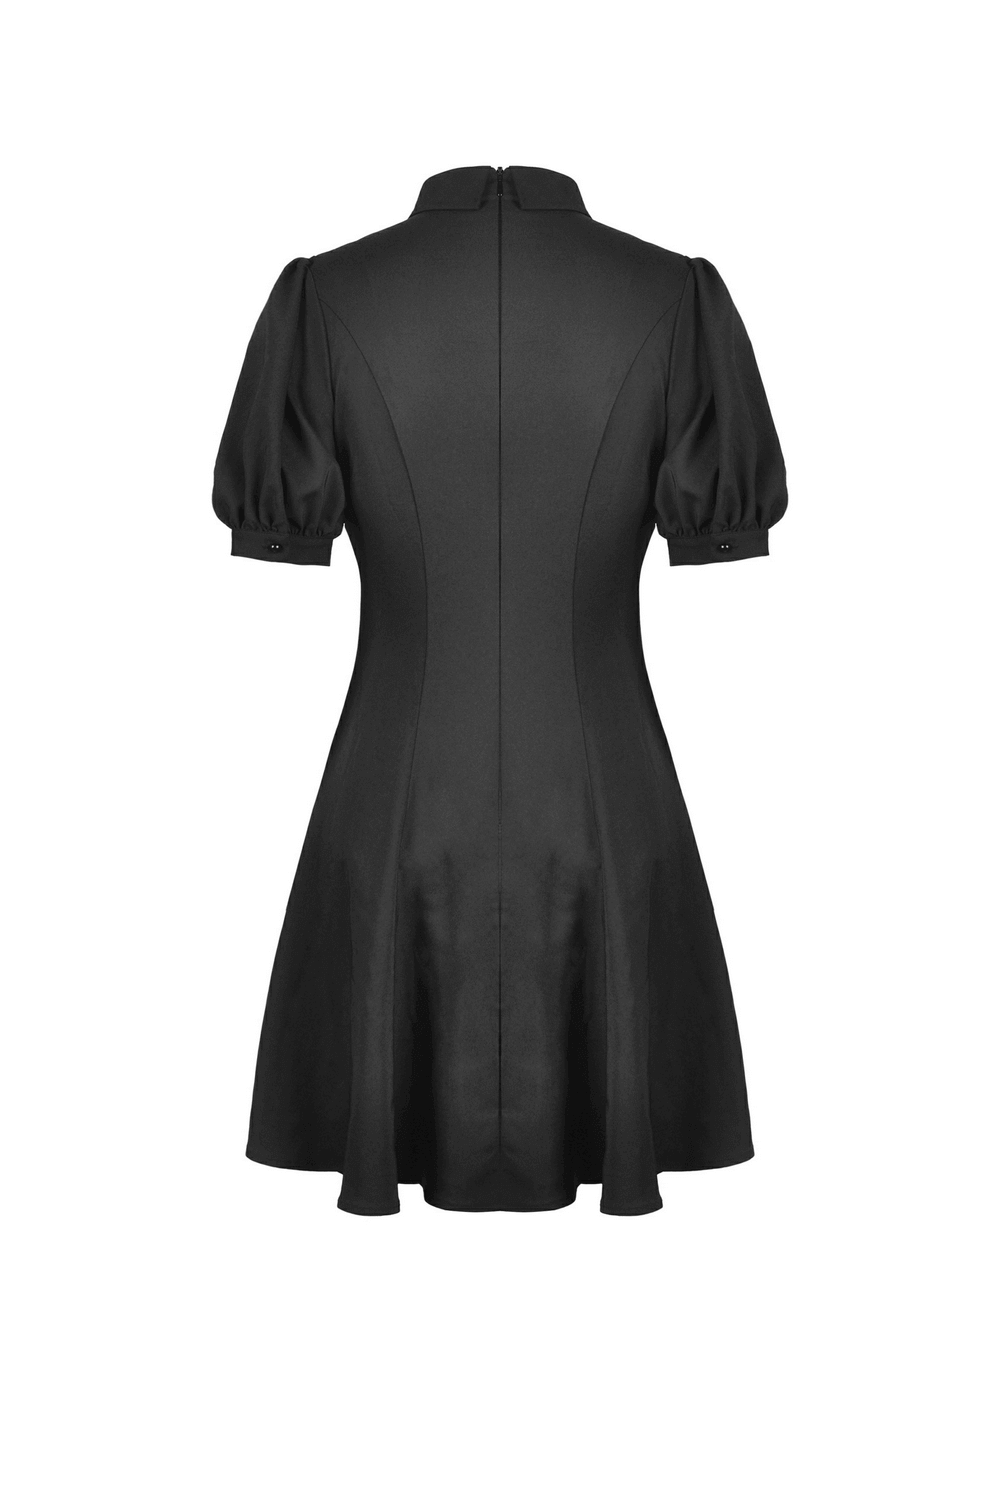 Black Rebel Goth Lace-Up Dress With Metal Star Accents